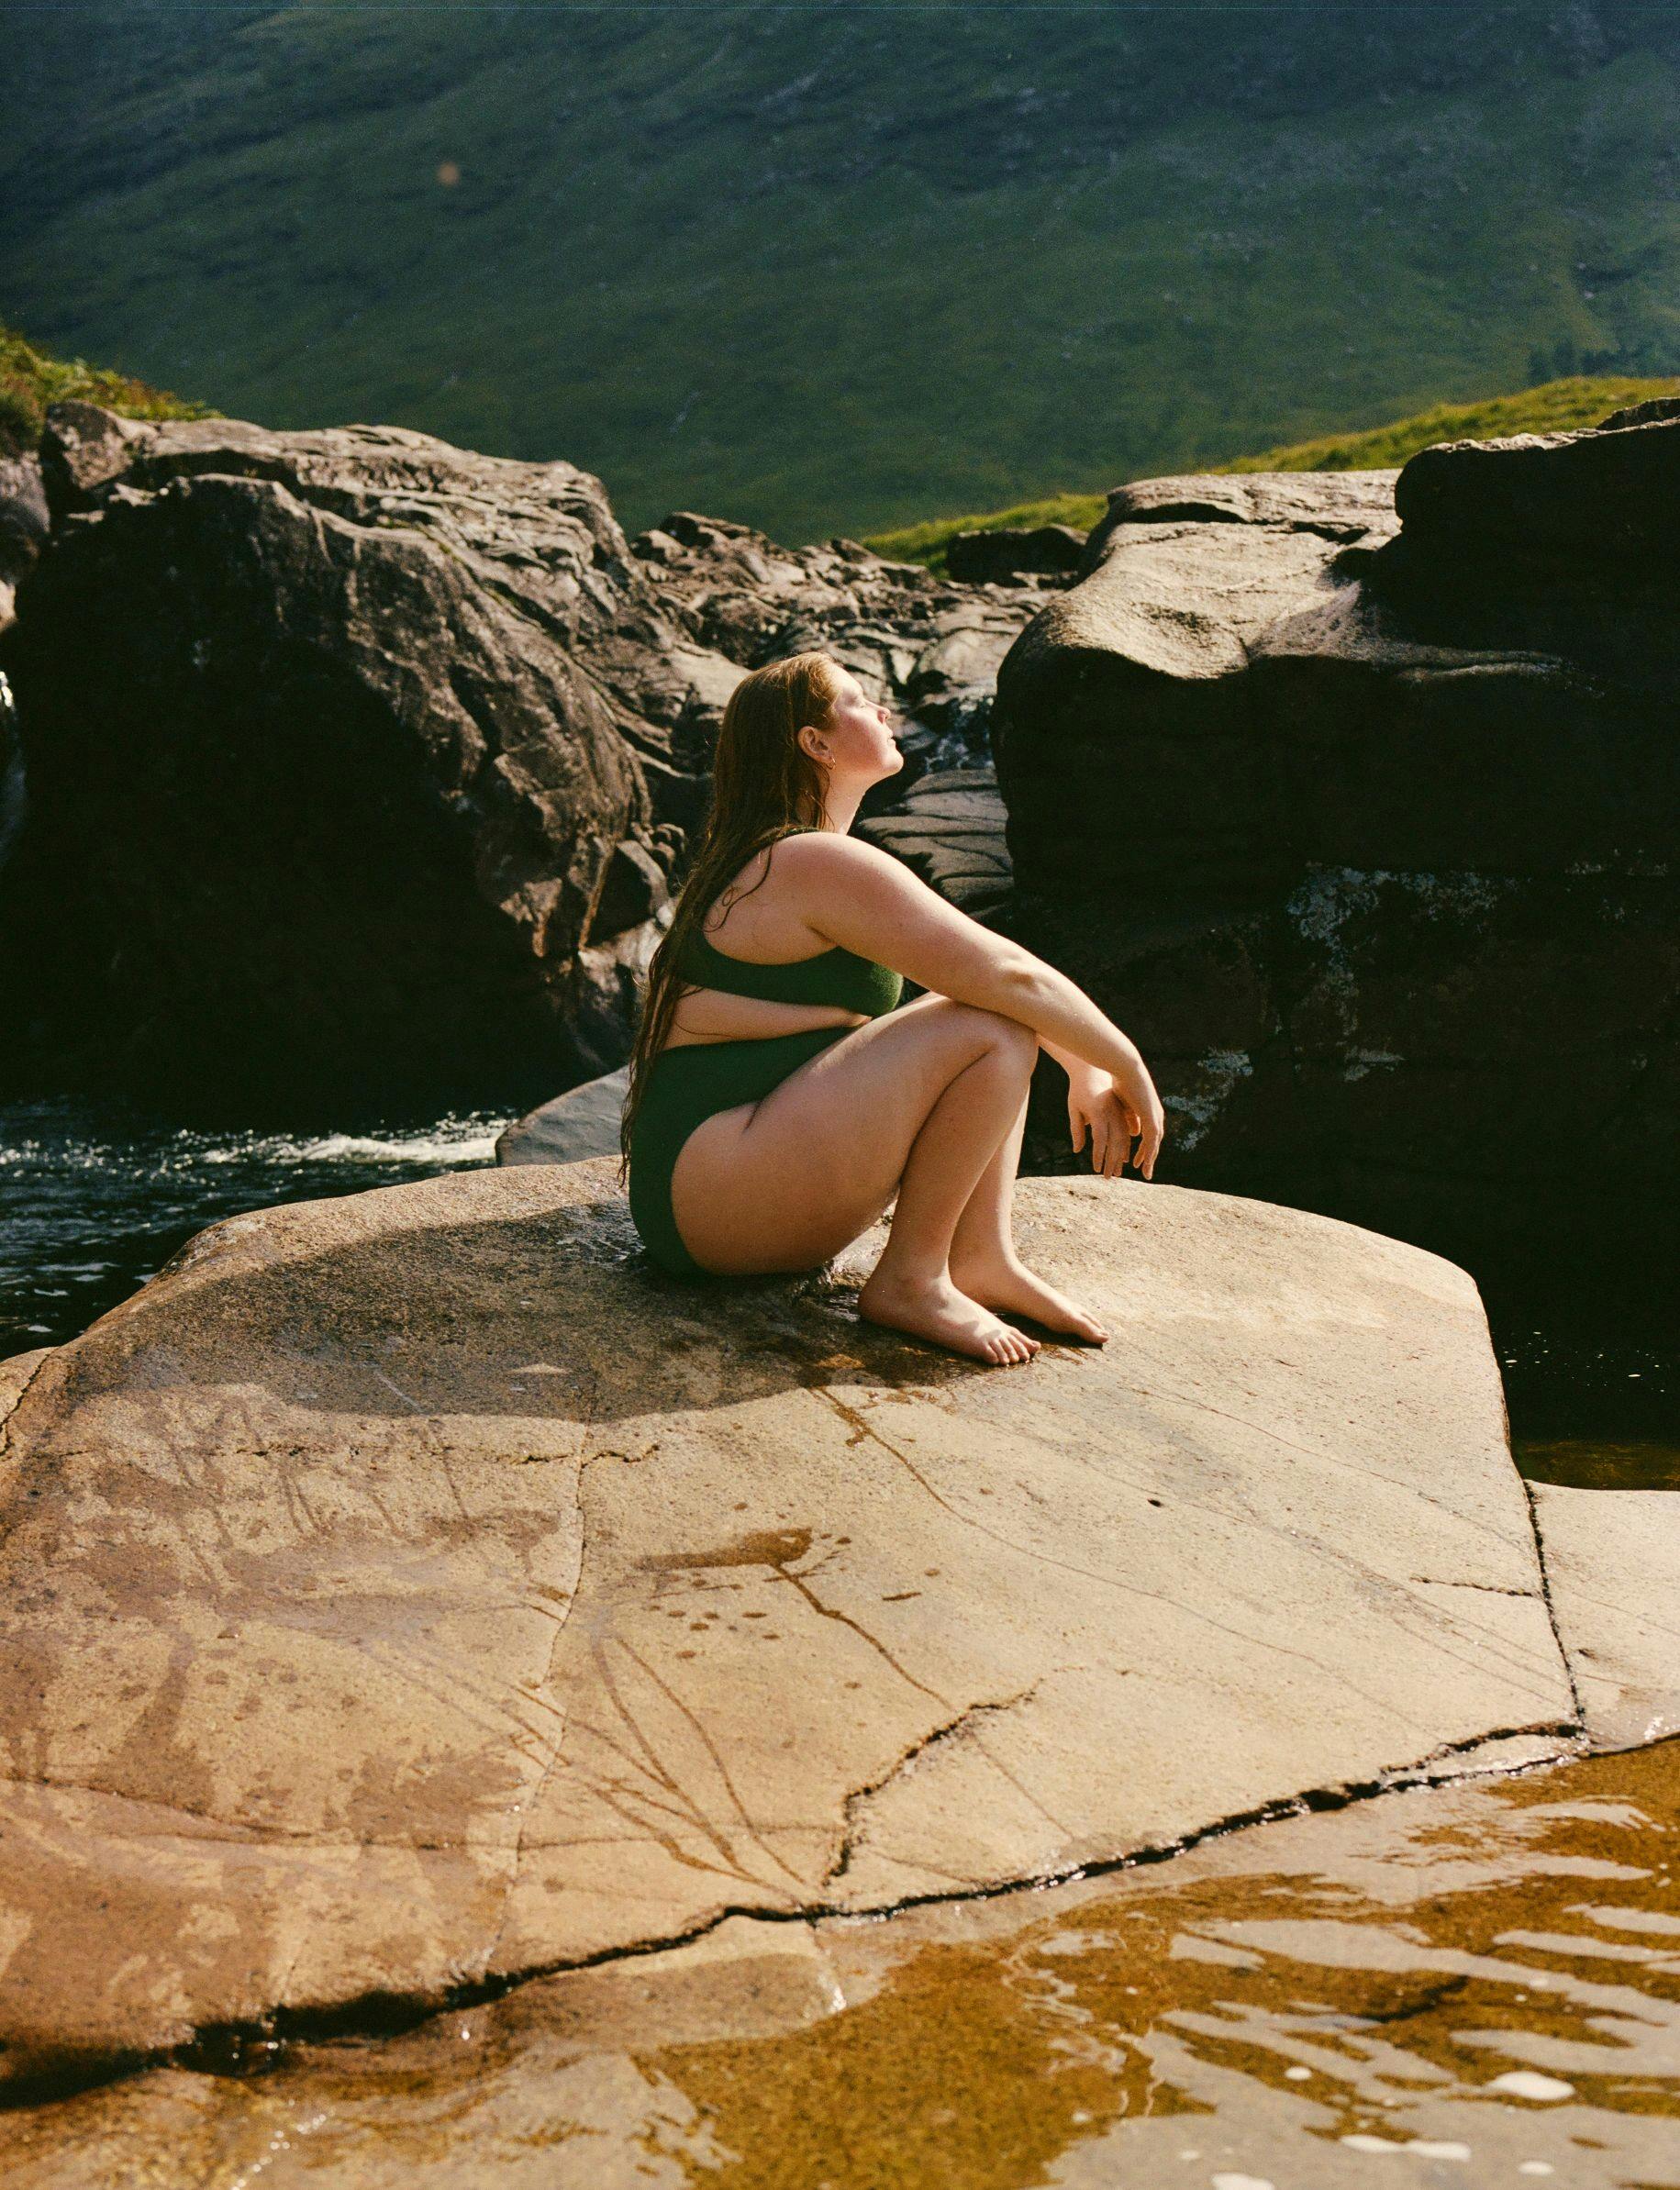 Thea sitting on rock by water